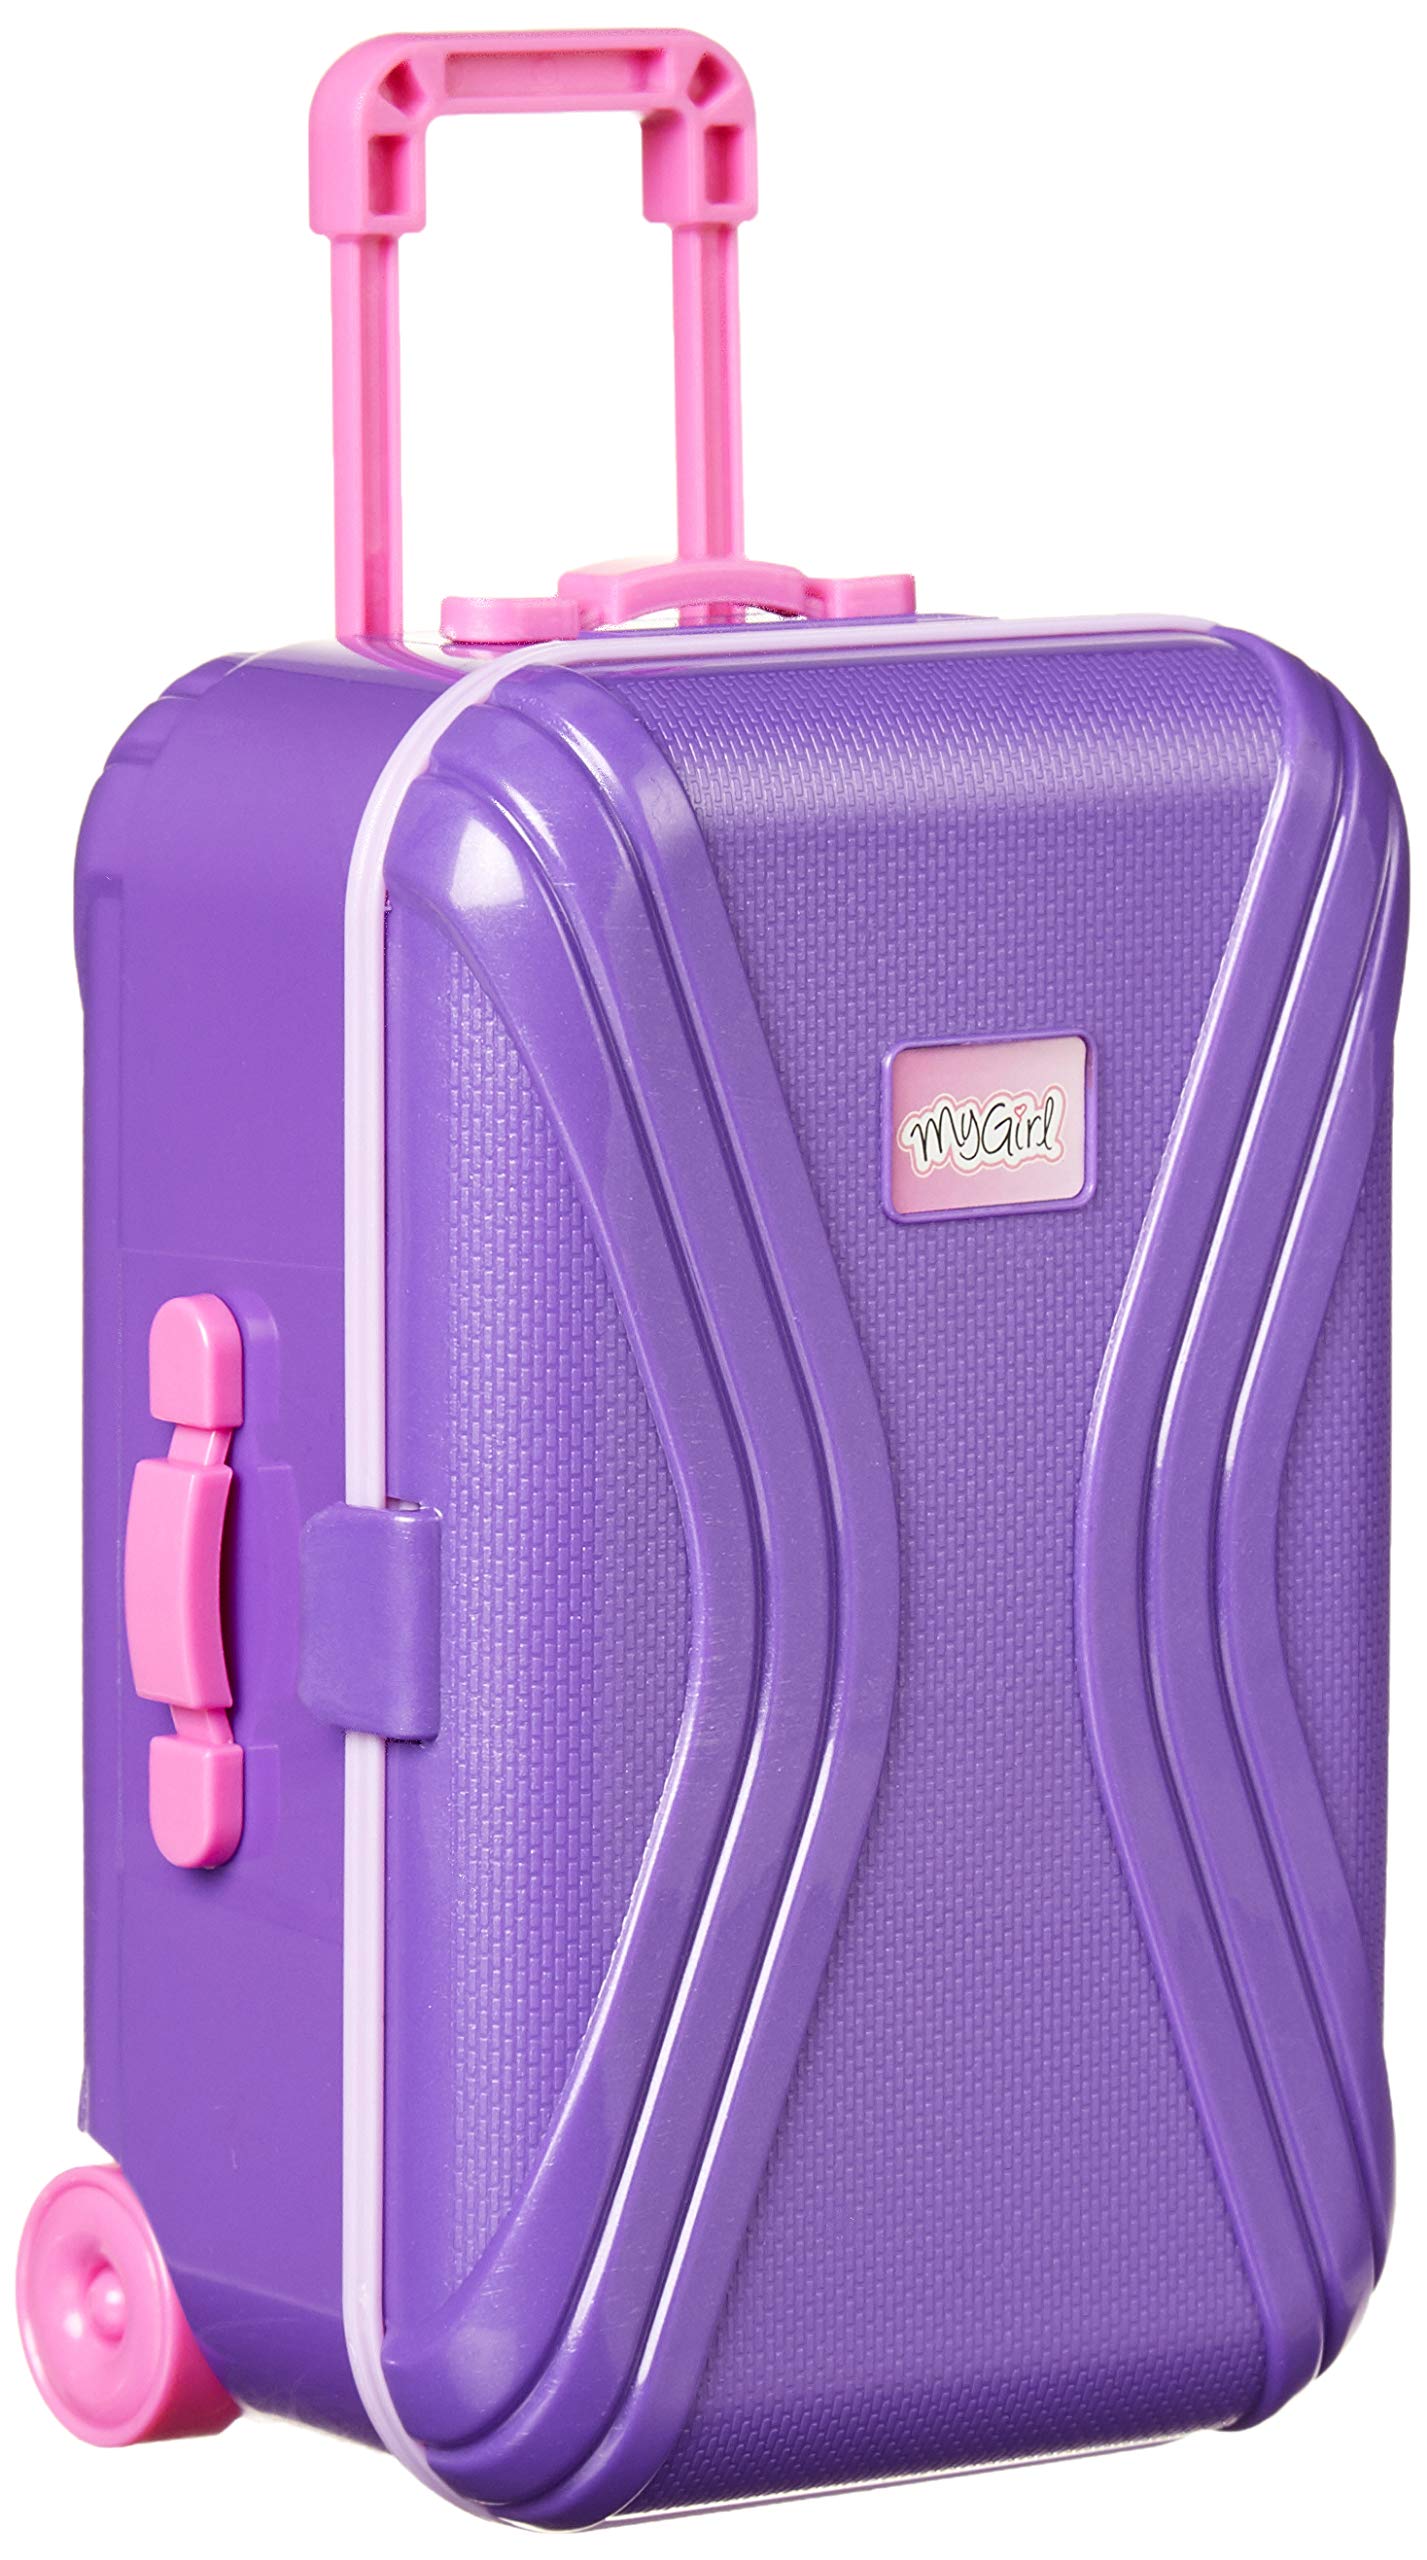 Click N' Play 18” Doll Travel Carry On Suitcase Luggage 7 Piece Set Includes Travel Gear Accessories, Photo Camera, Sunglasses, and Passport, Pretend Play Toys for Kids, Doll is Not Included